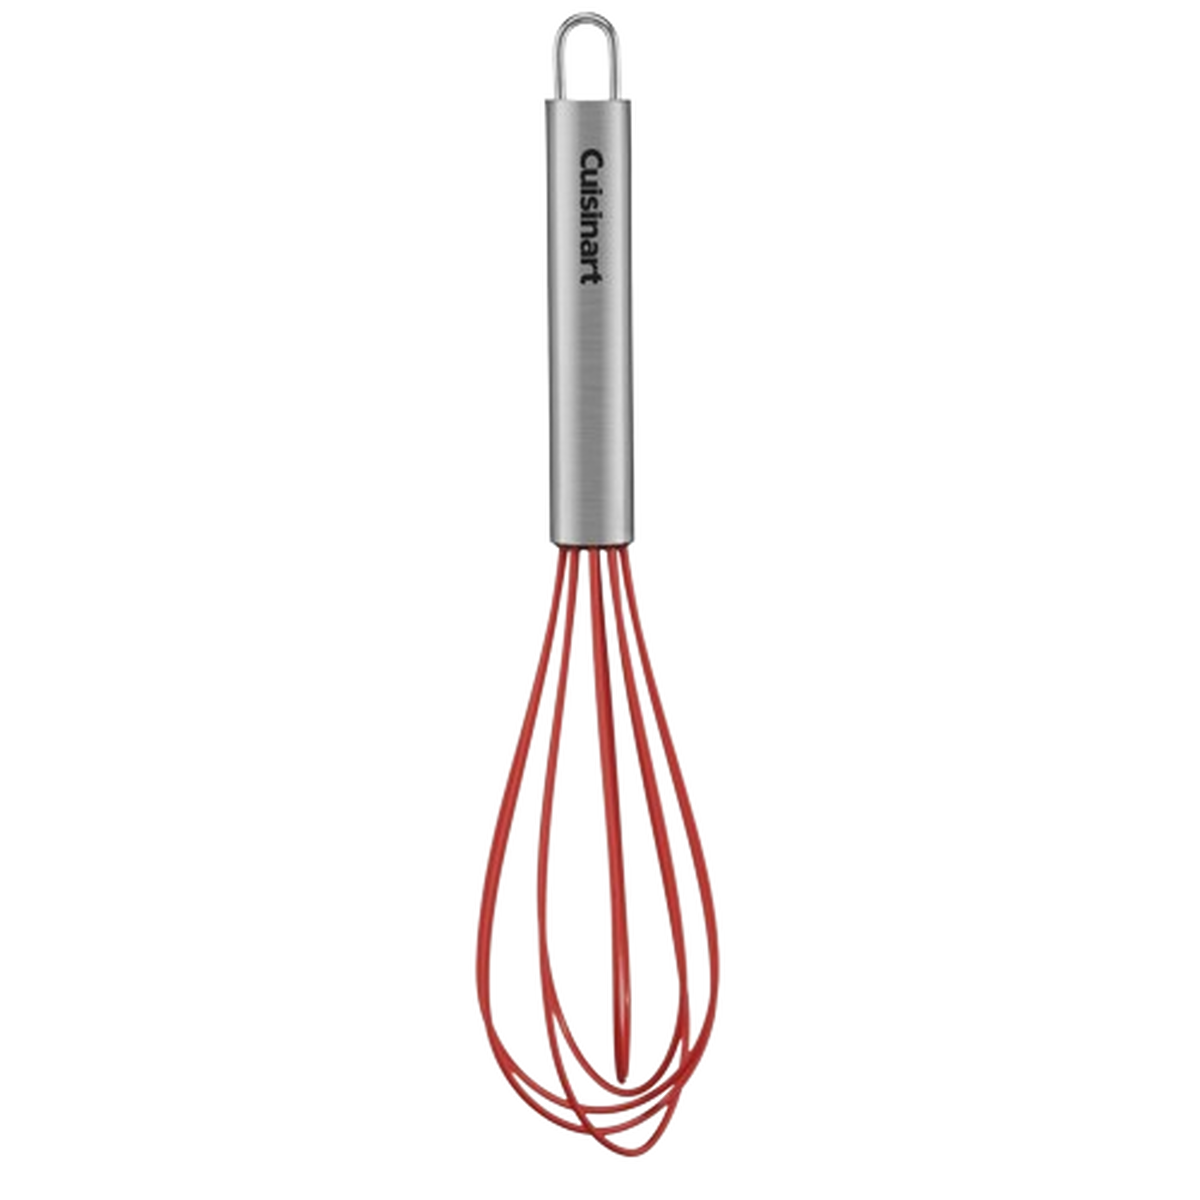 10" Silicone Whisk